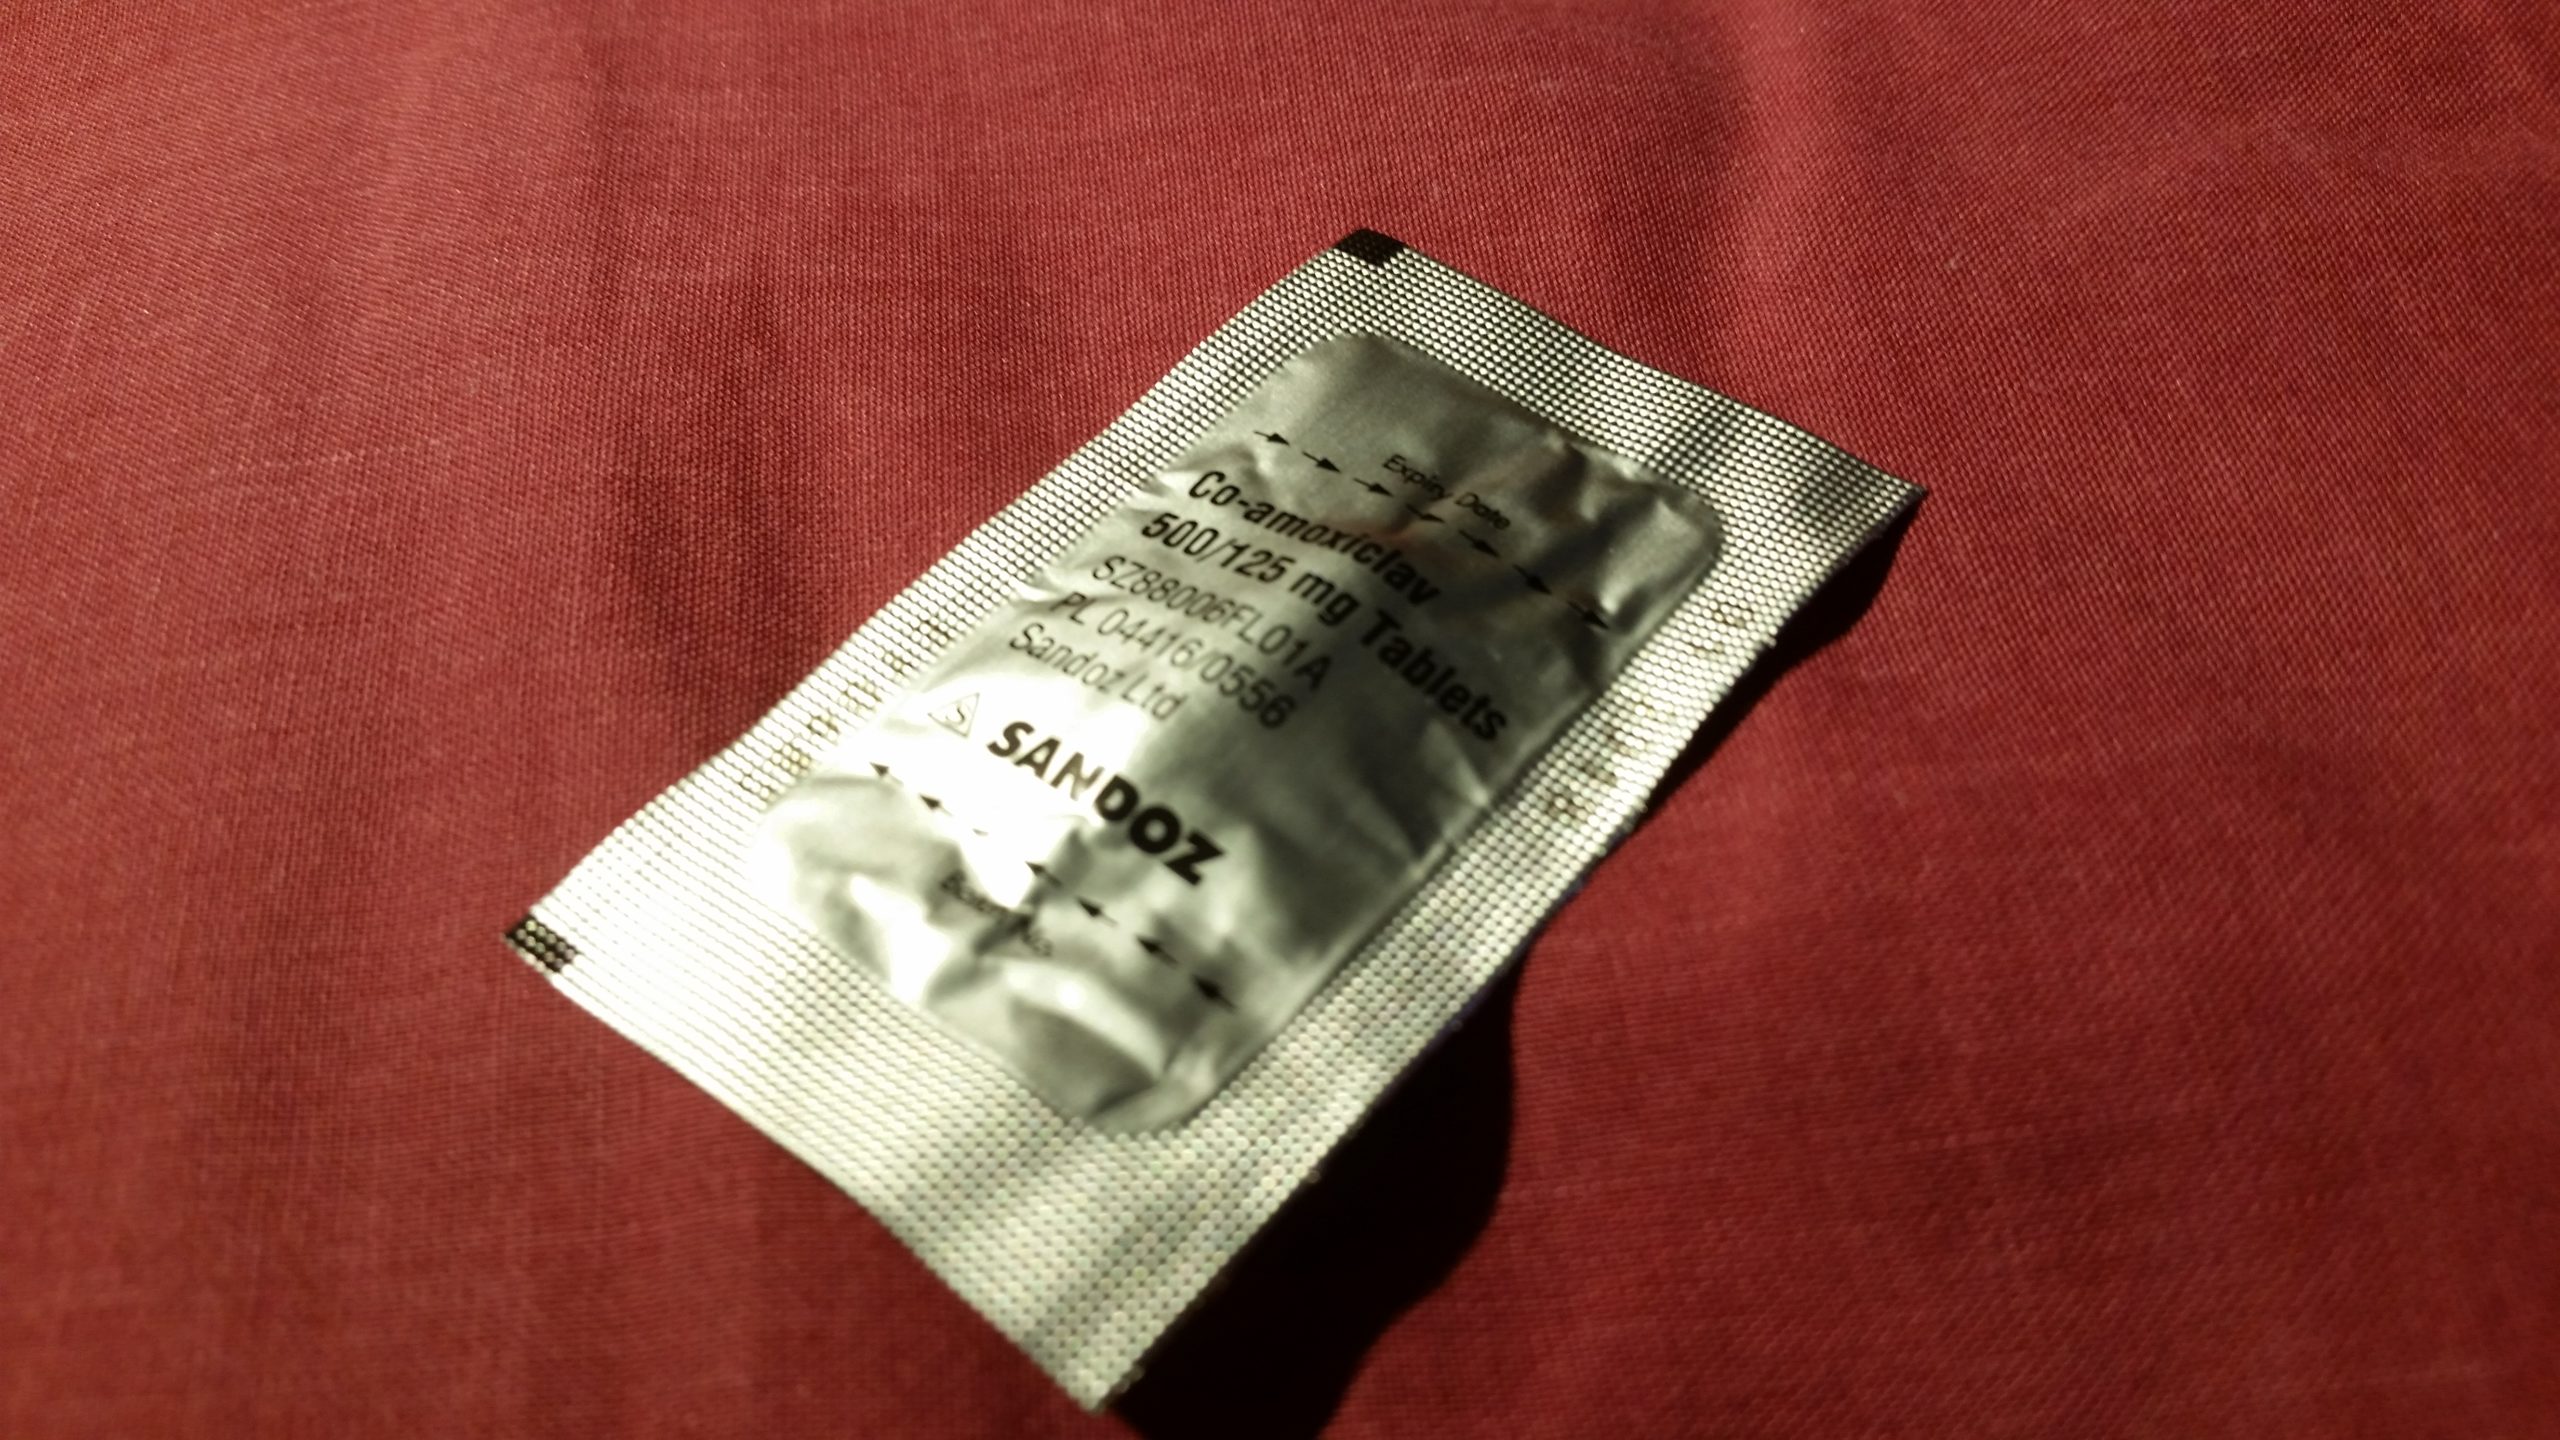 Co-amoxiclav tablet in packaging.